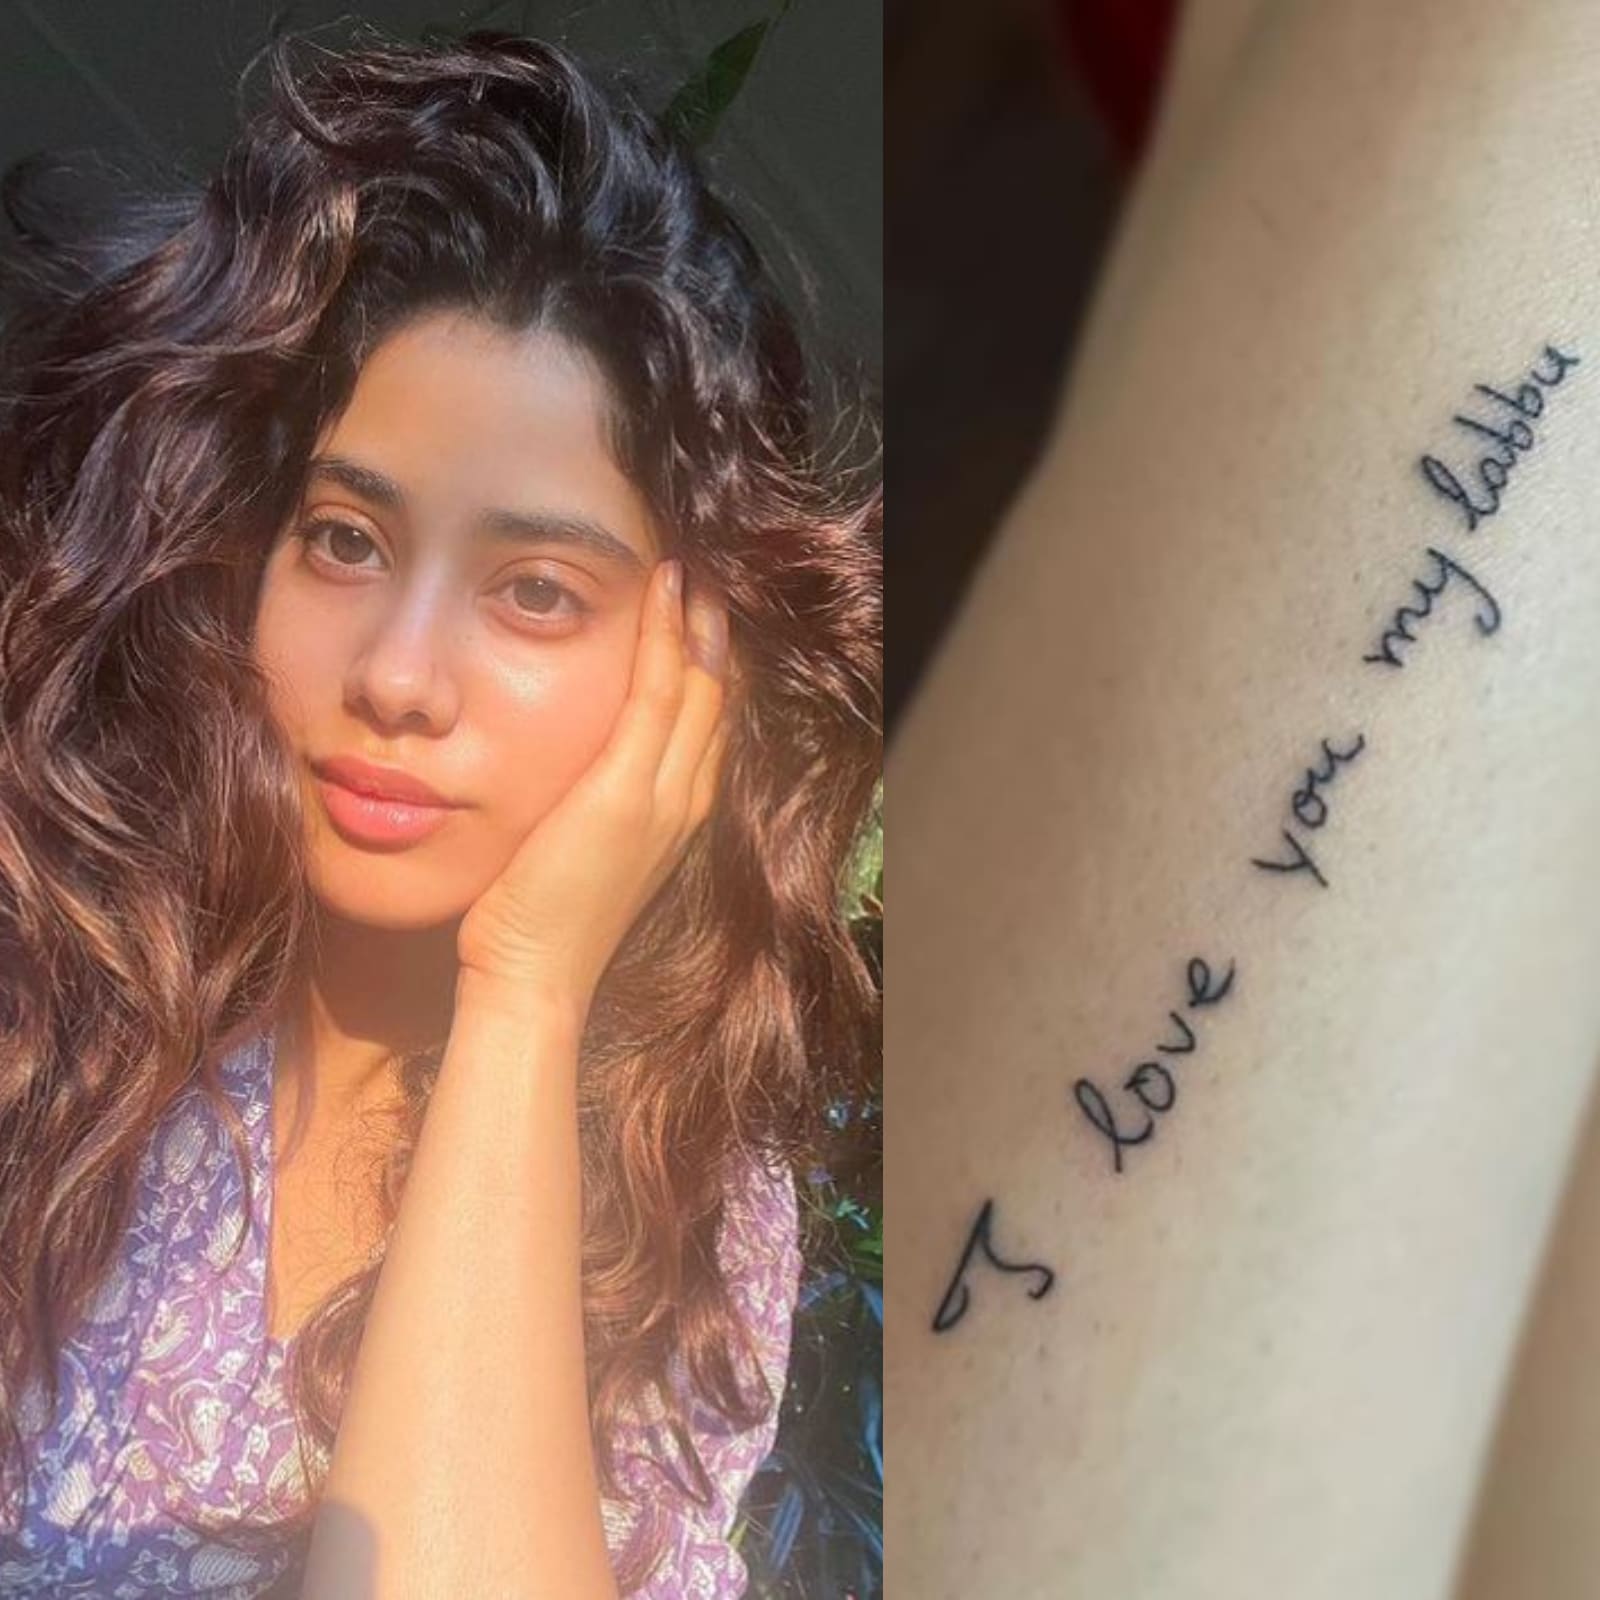 9 Celebrities Who Got Tattoos For Their Lovers In Case Thats On Your  Mind Too